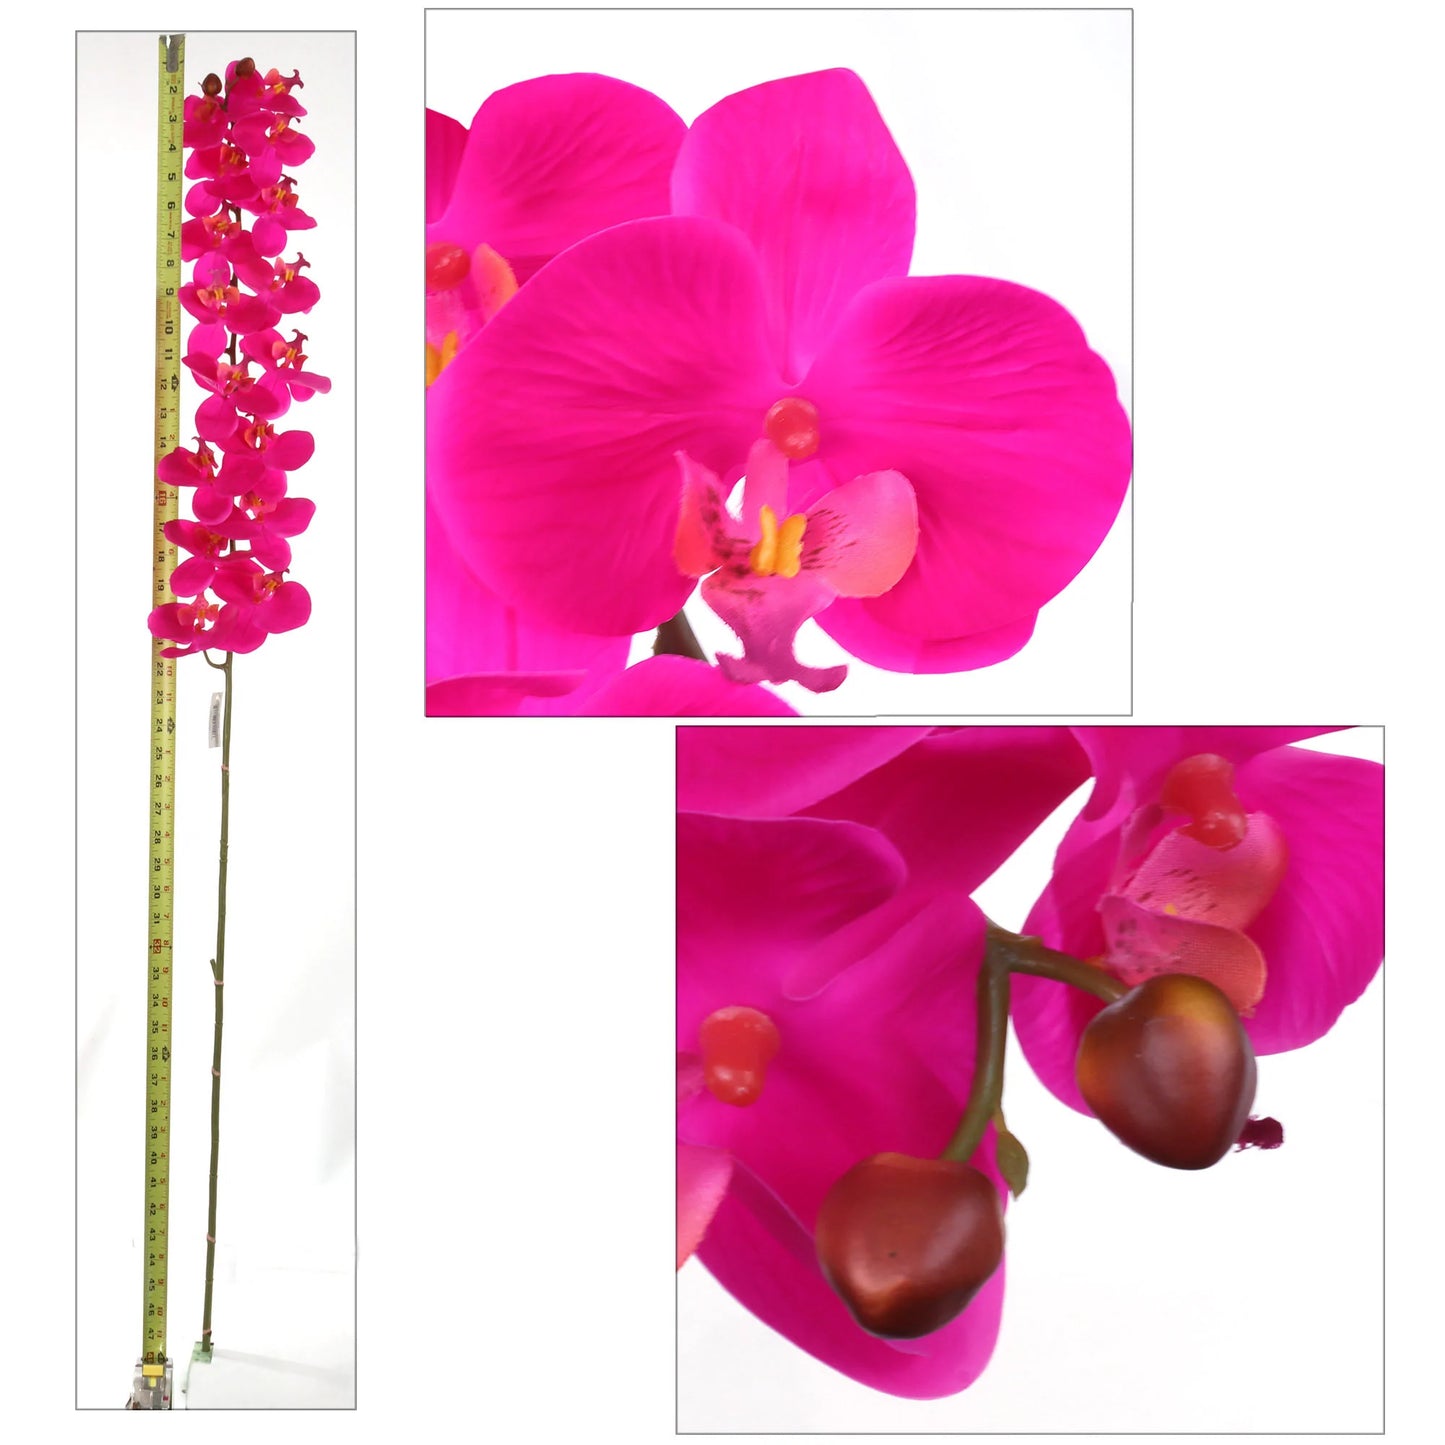 Artificial Real Touch Silk Phalaenopsis Orchid 16 Flowers- 49”